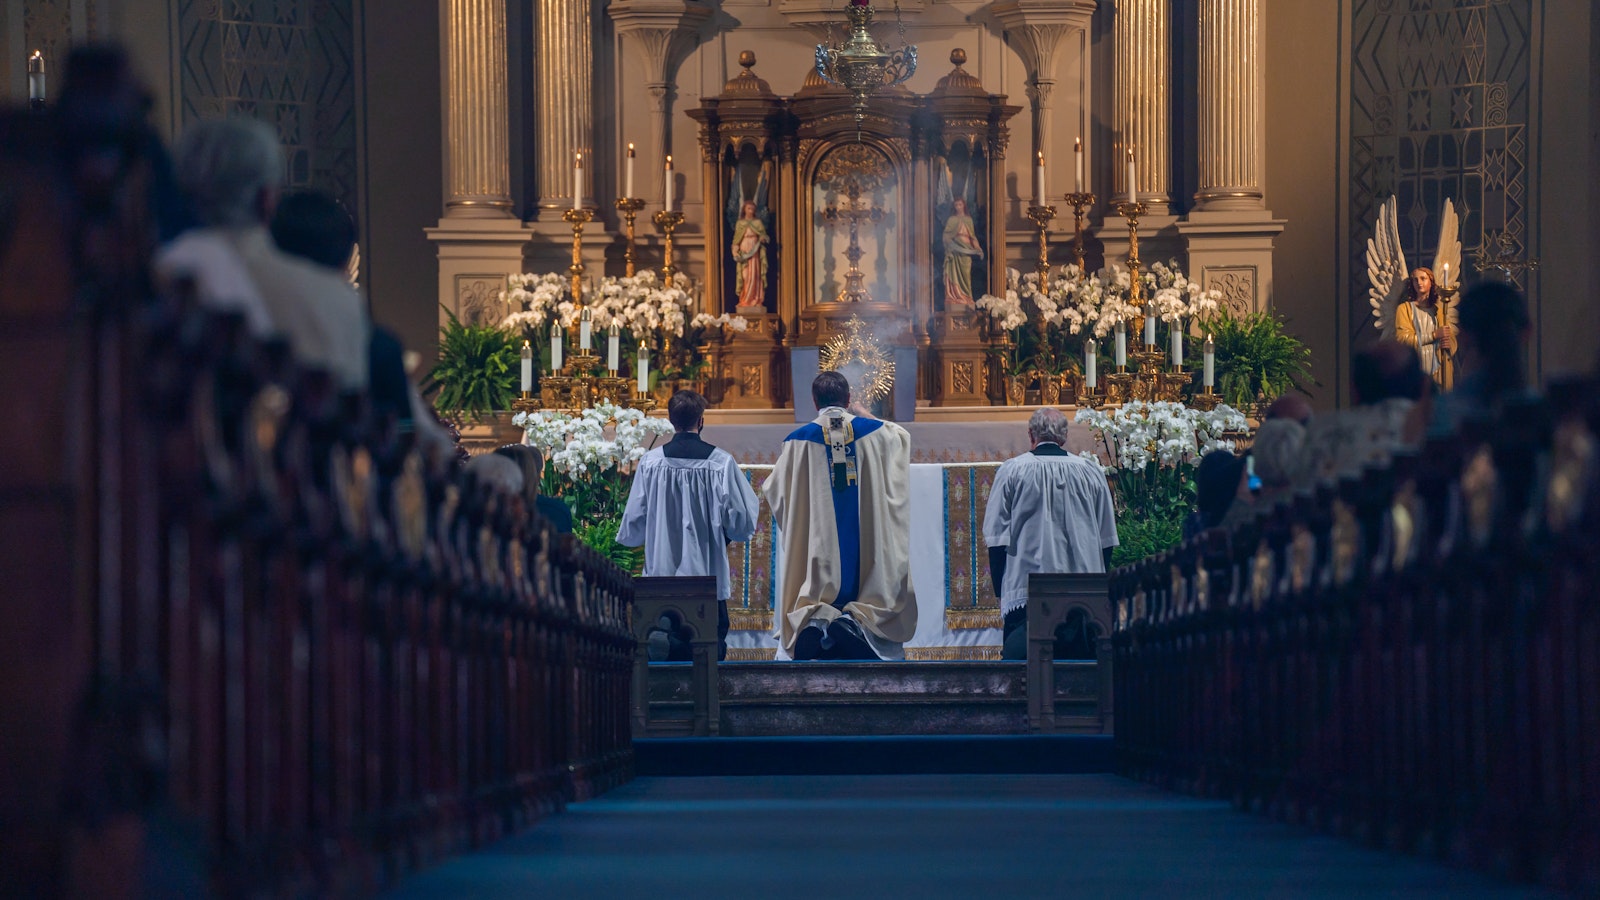 Archbishop Vigneron leads Eucharistic adoration at Old St. Mary's Church in downtown Detroit's Greektown after a Mass and May crowning of the Blessed Virgin Mary on May 2, 2021. (Valaurian Waller | Detroit Catholic)